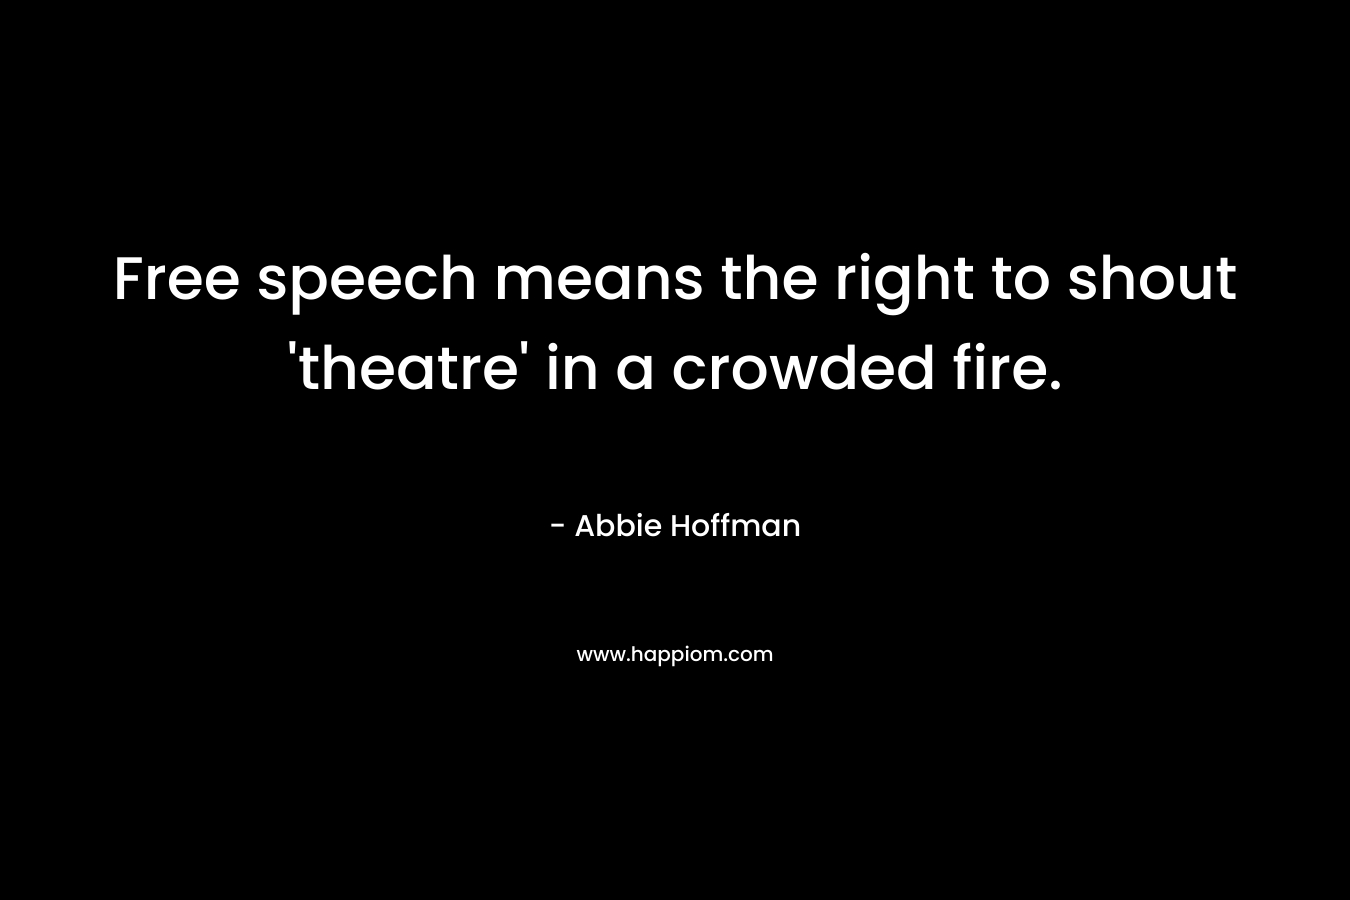 Free speech means the right to shout ‘theatre’ in a crowded fire. – Abbie Hoffman